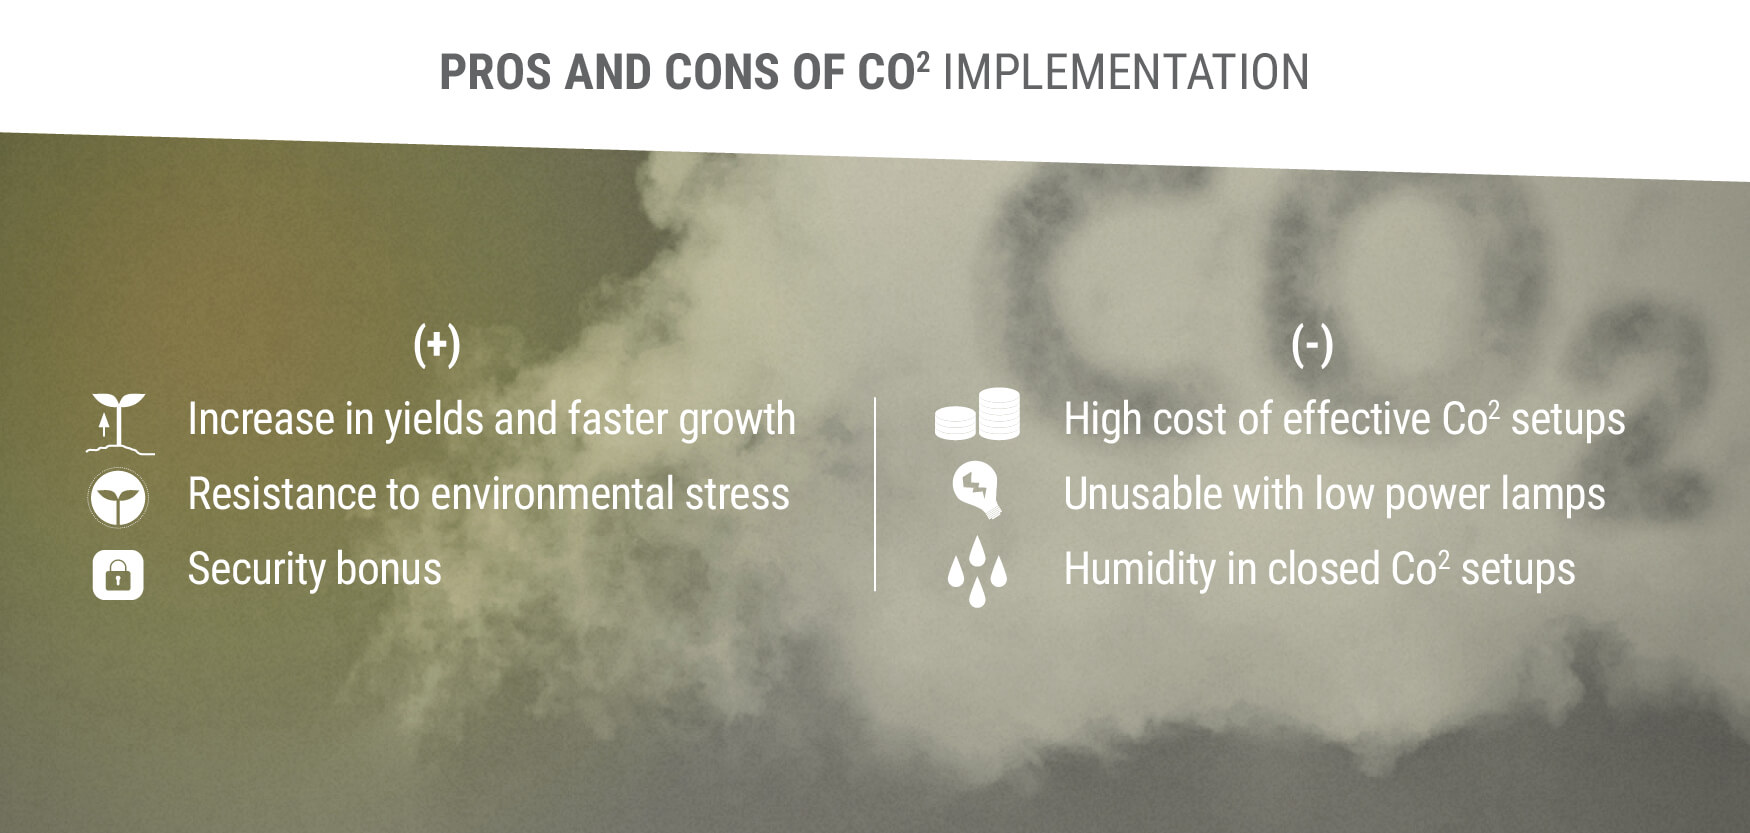 Pros and Cons of CO2 Implementation